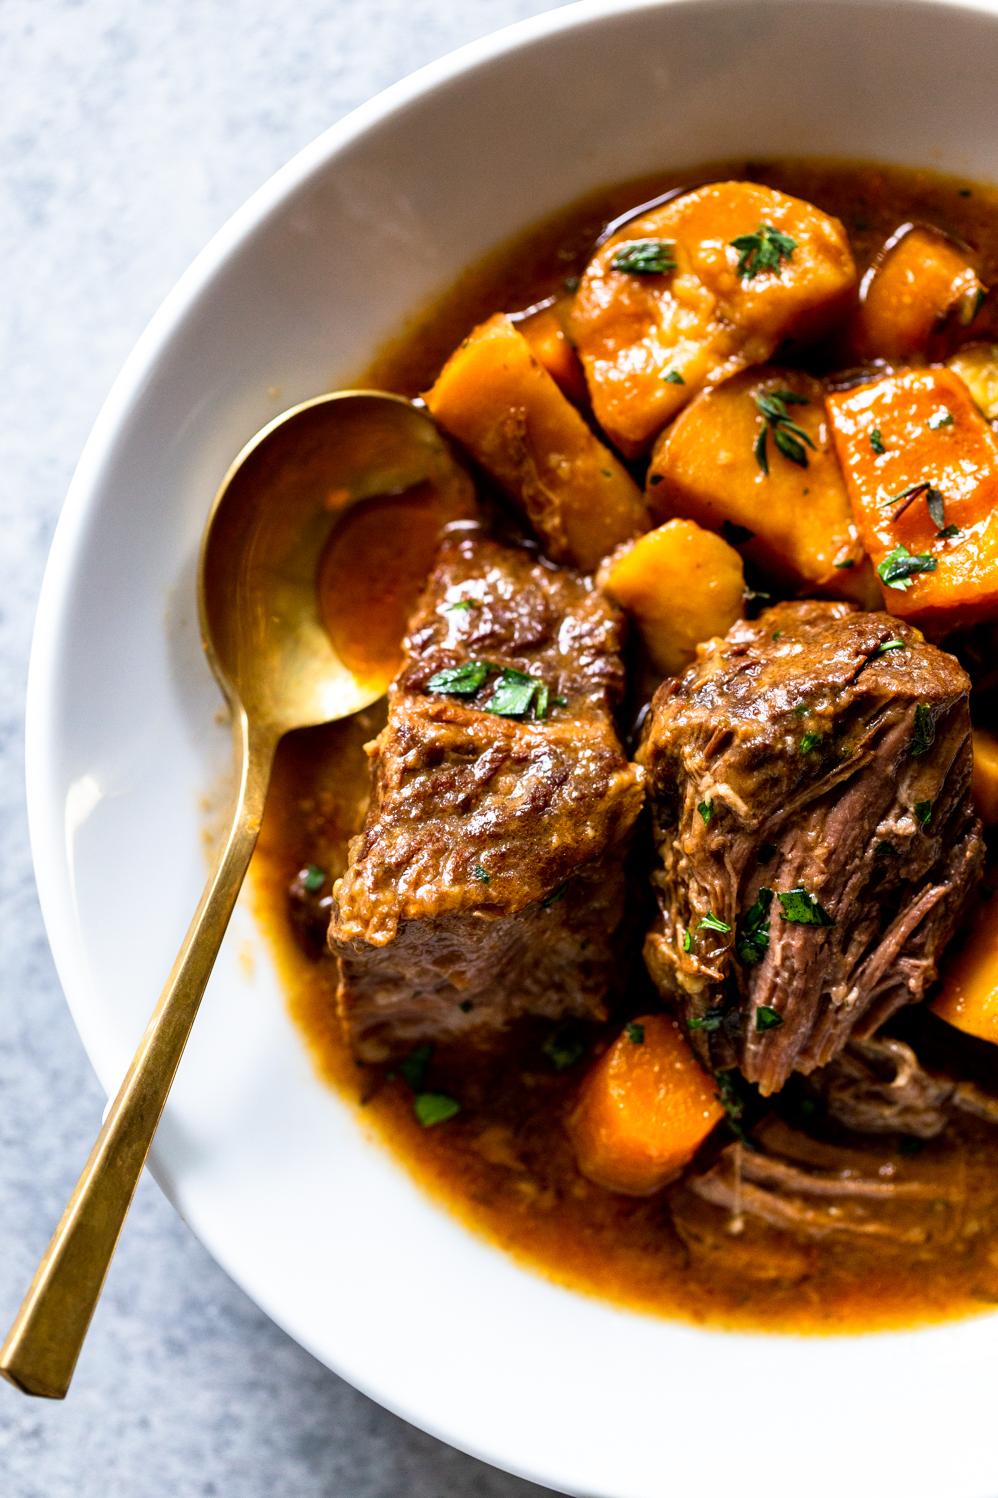  A hearty pot of Irish goodness ready to warm you up.